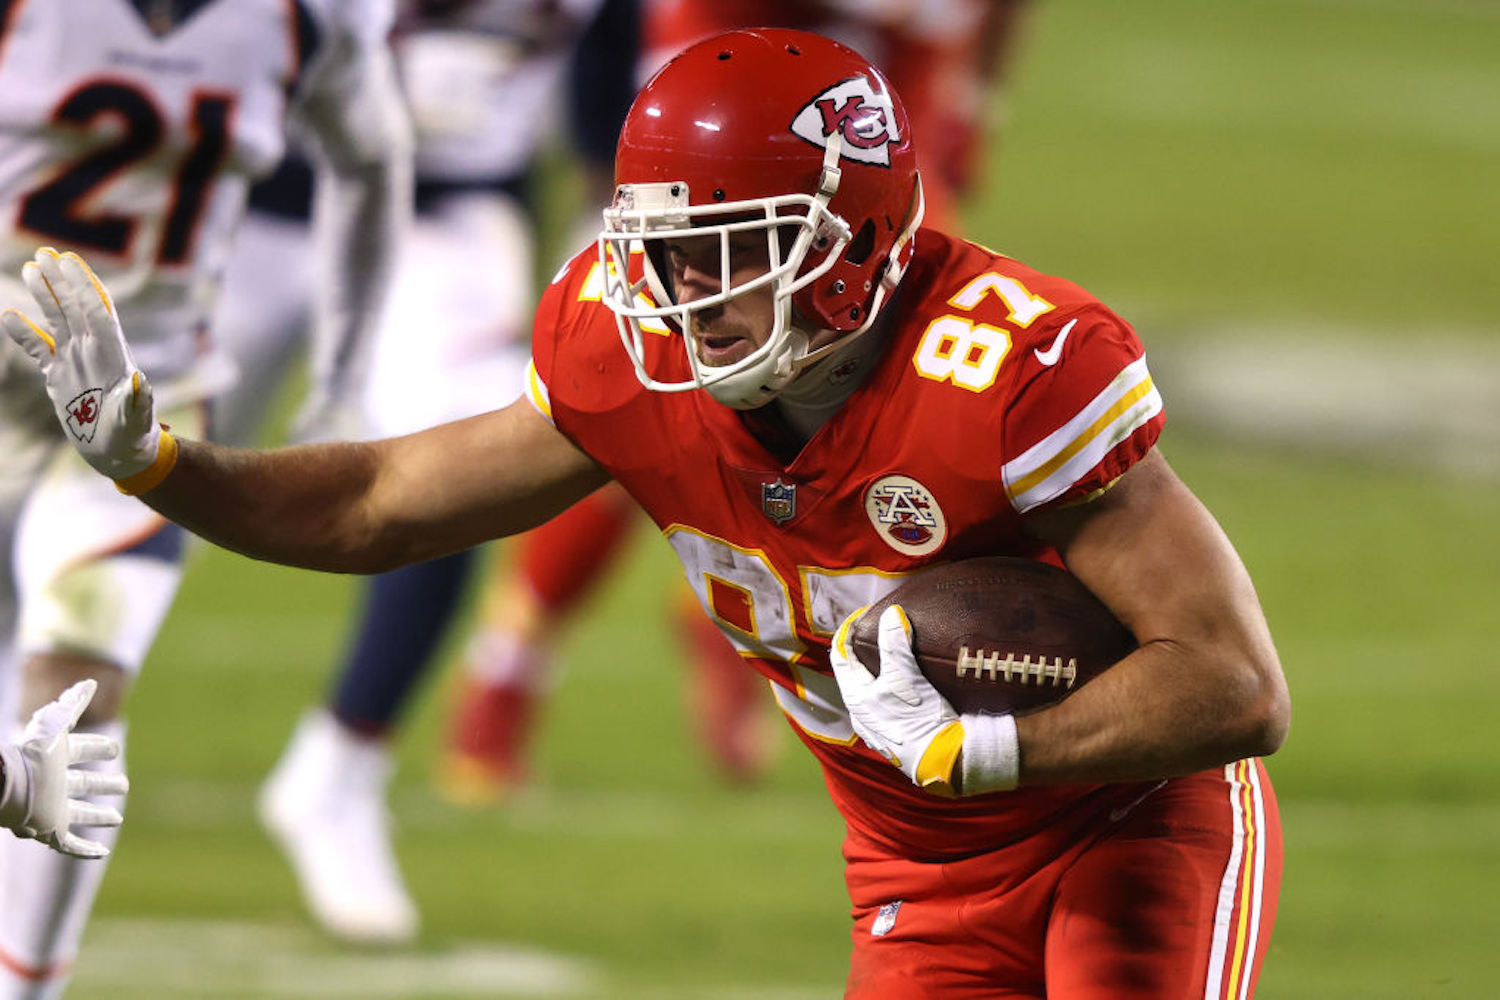 On Sunday night, Travis Kelce became the first tight end in NFL history to record 1,000 receiving yards in five seasons.